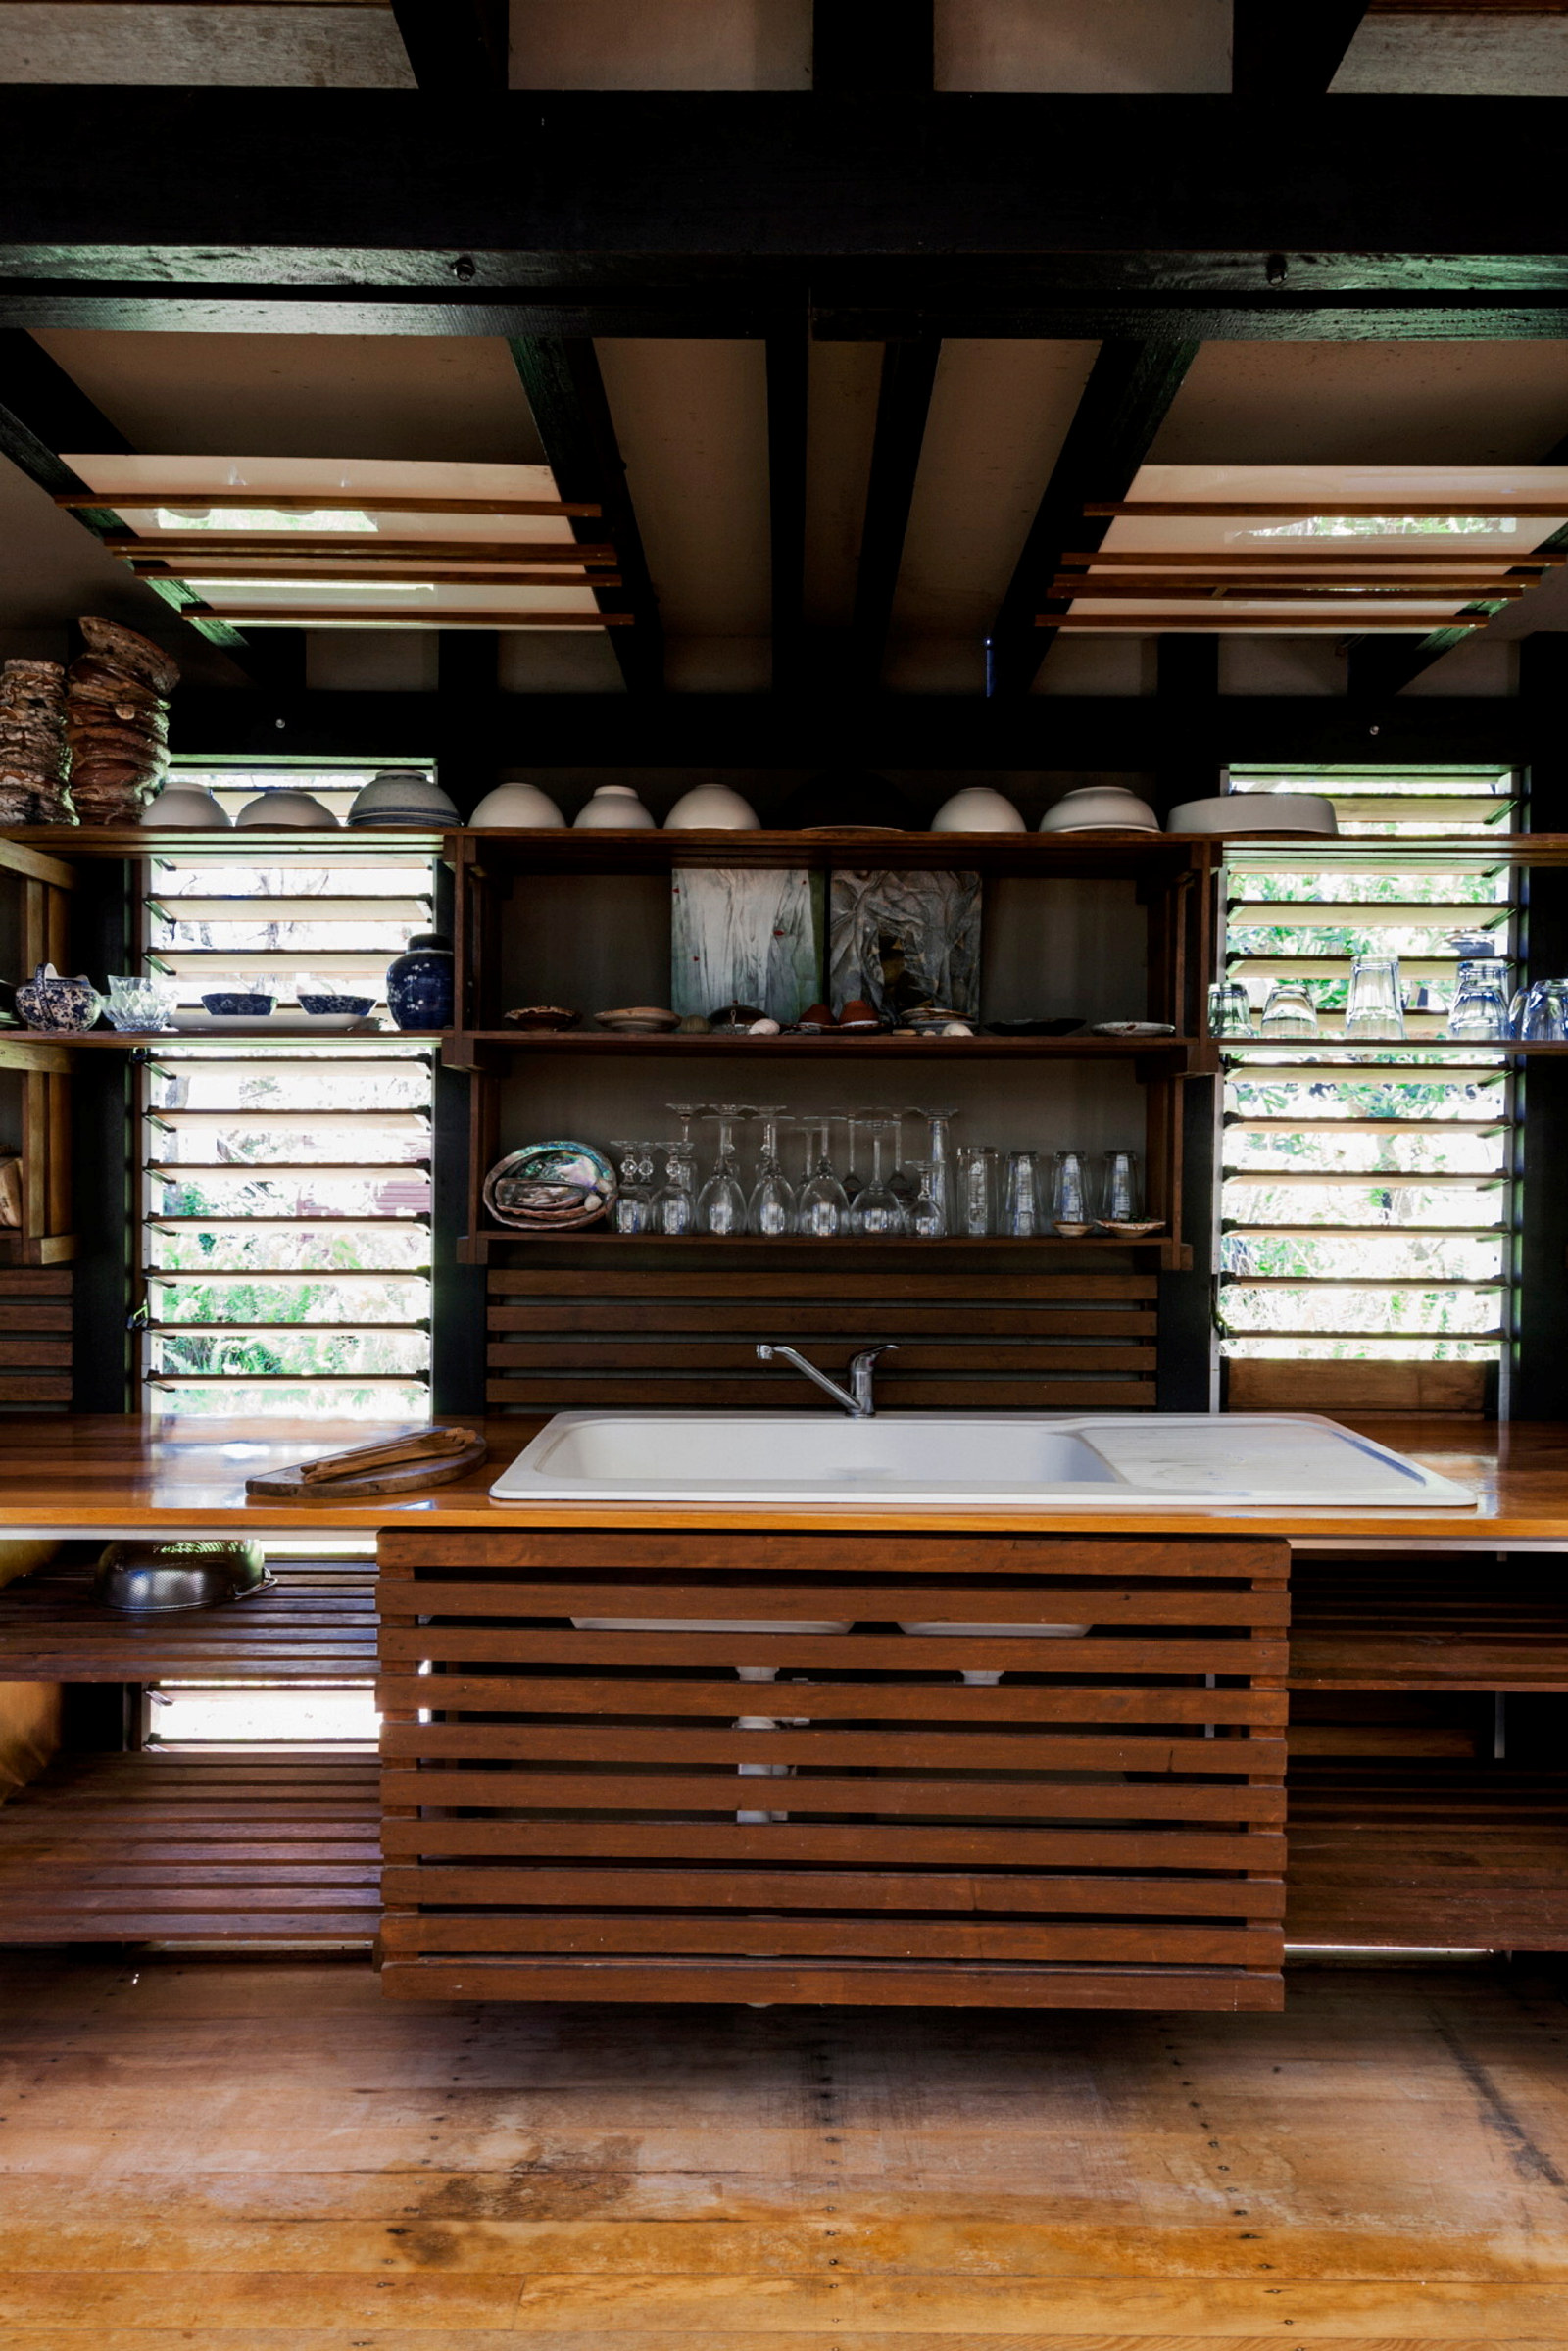 This is a photograph of a timber and glass clad space with a large white ceramic sink in the centre and bowls, plates and glasses on the back wall